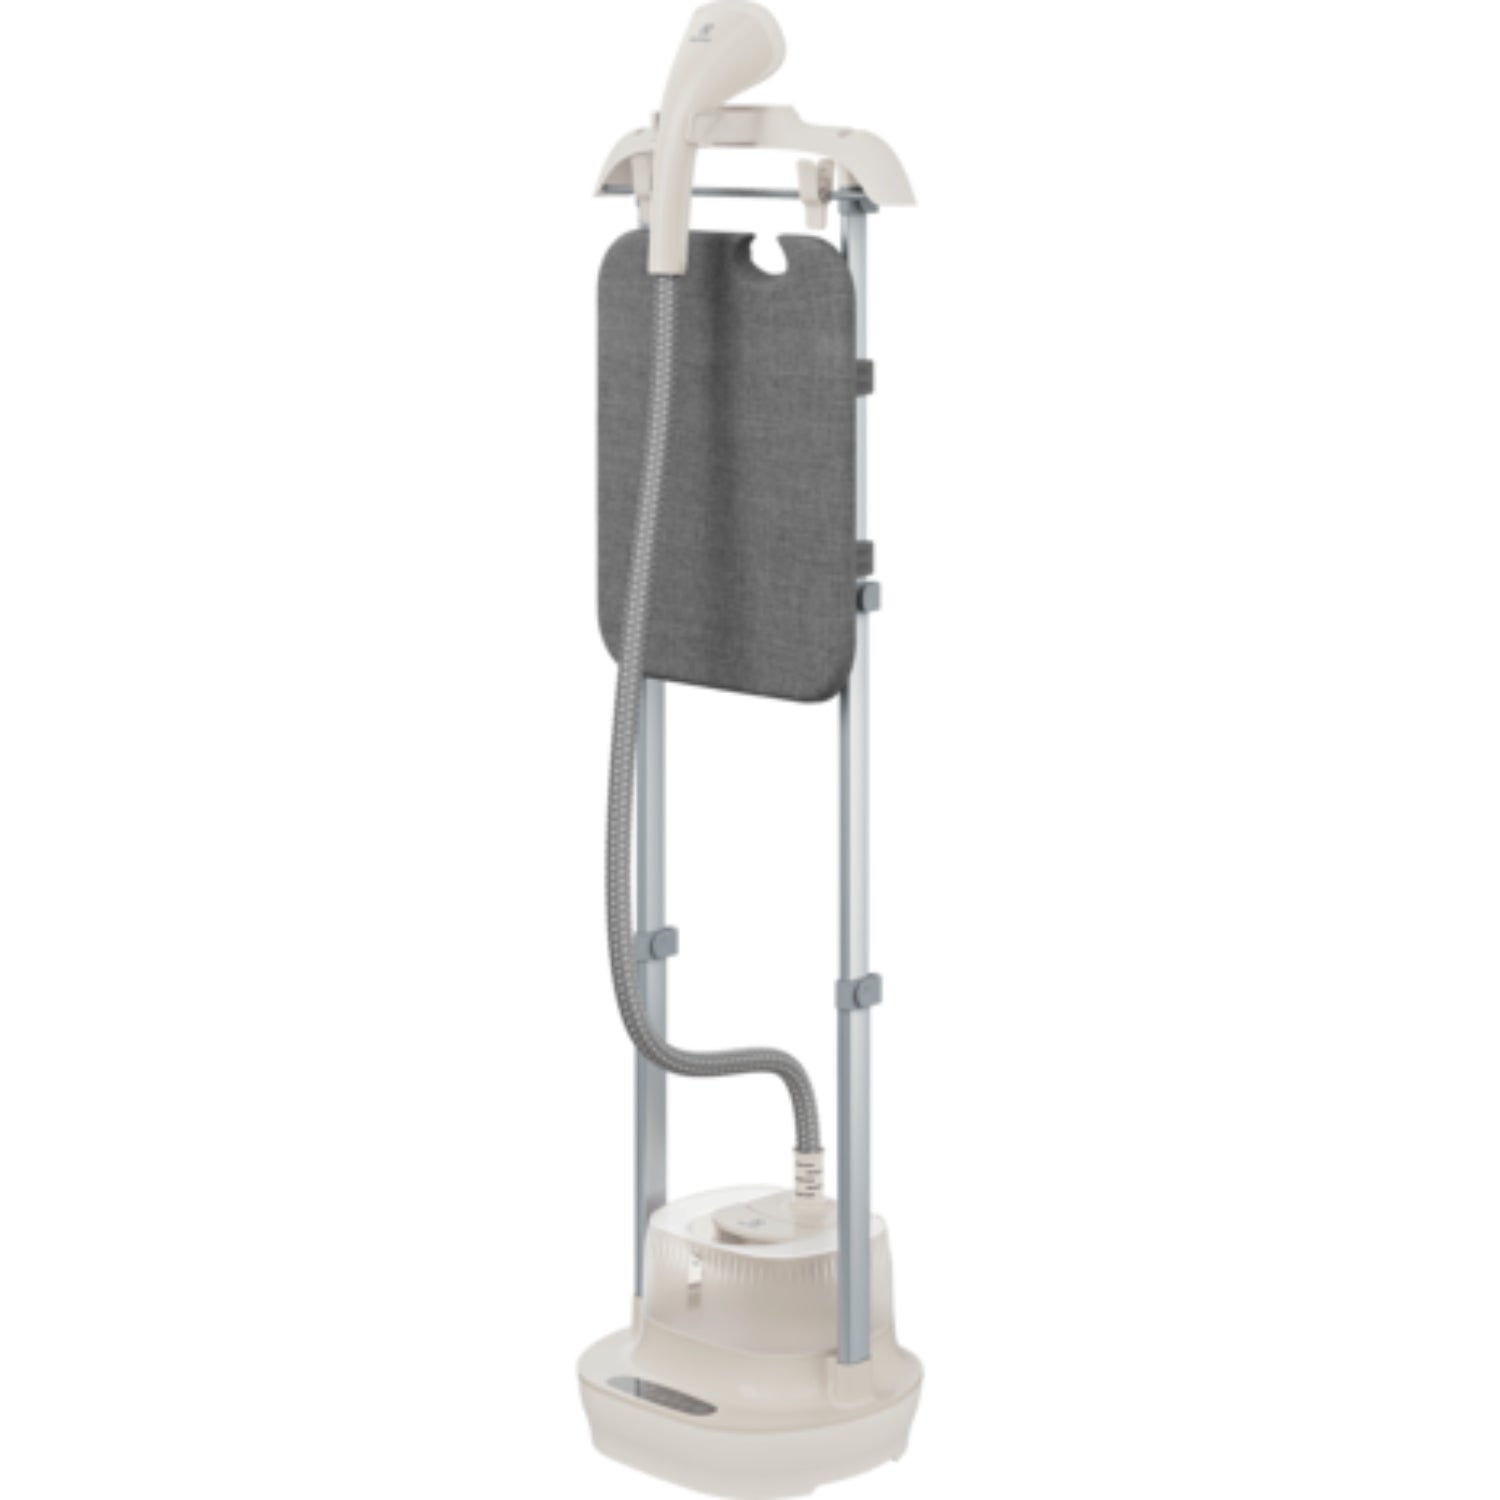 Electrolux Garment Steamer, 2000W with Flexible Nozzle and Soleplate, Grey